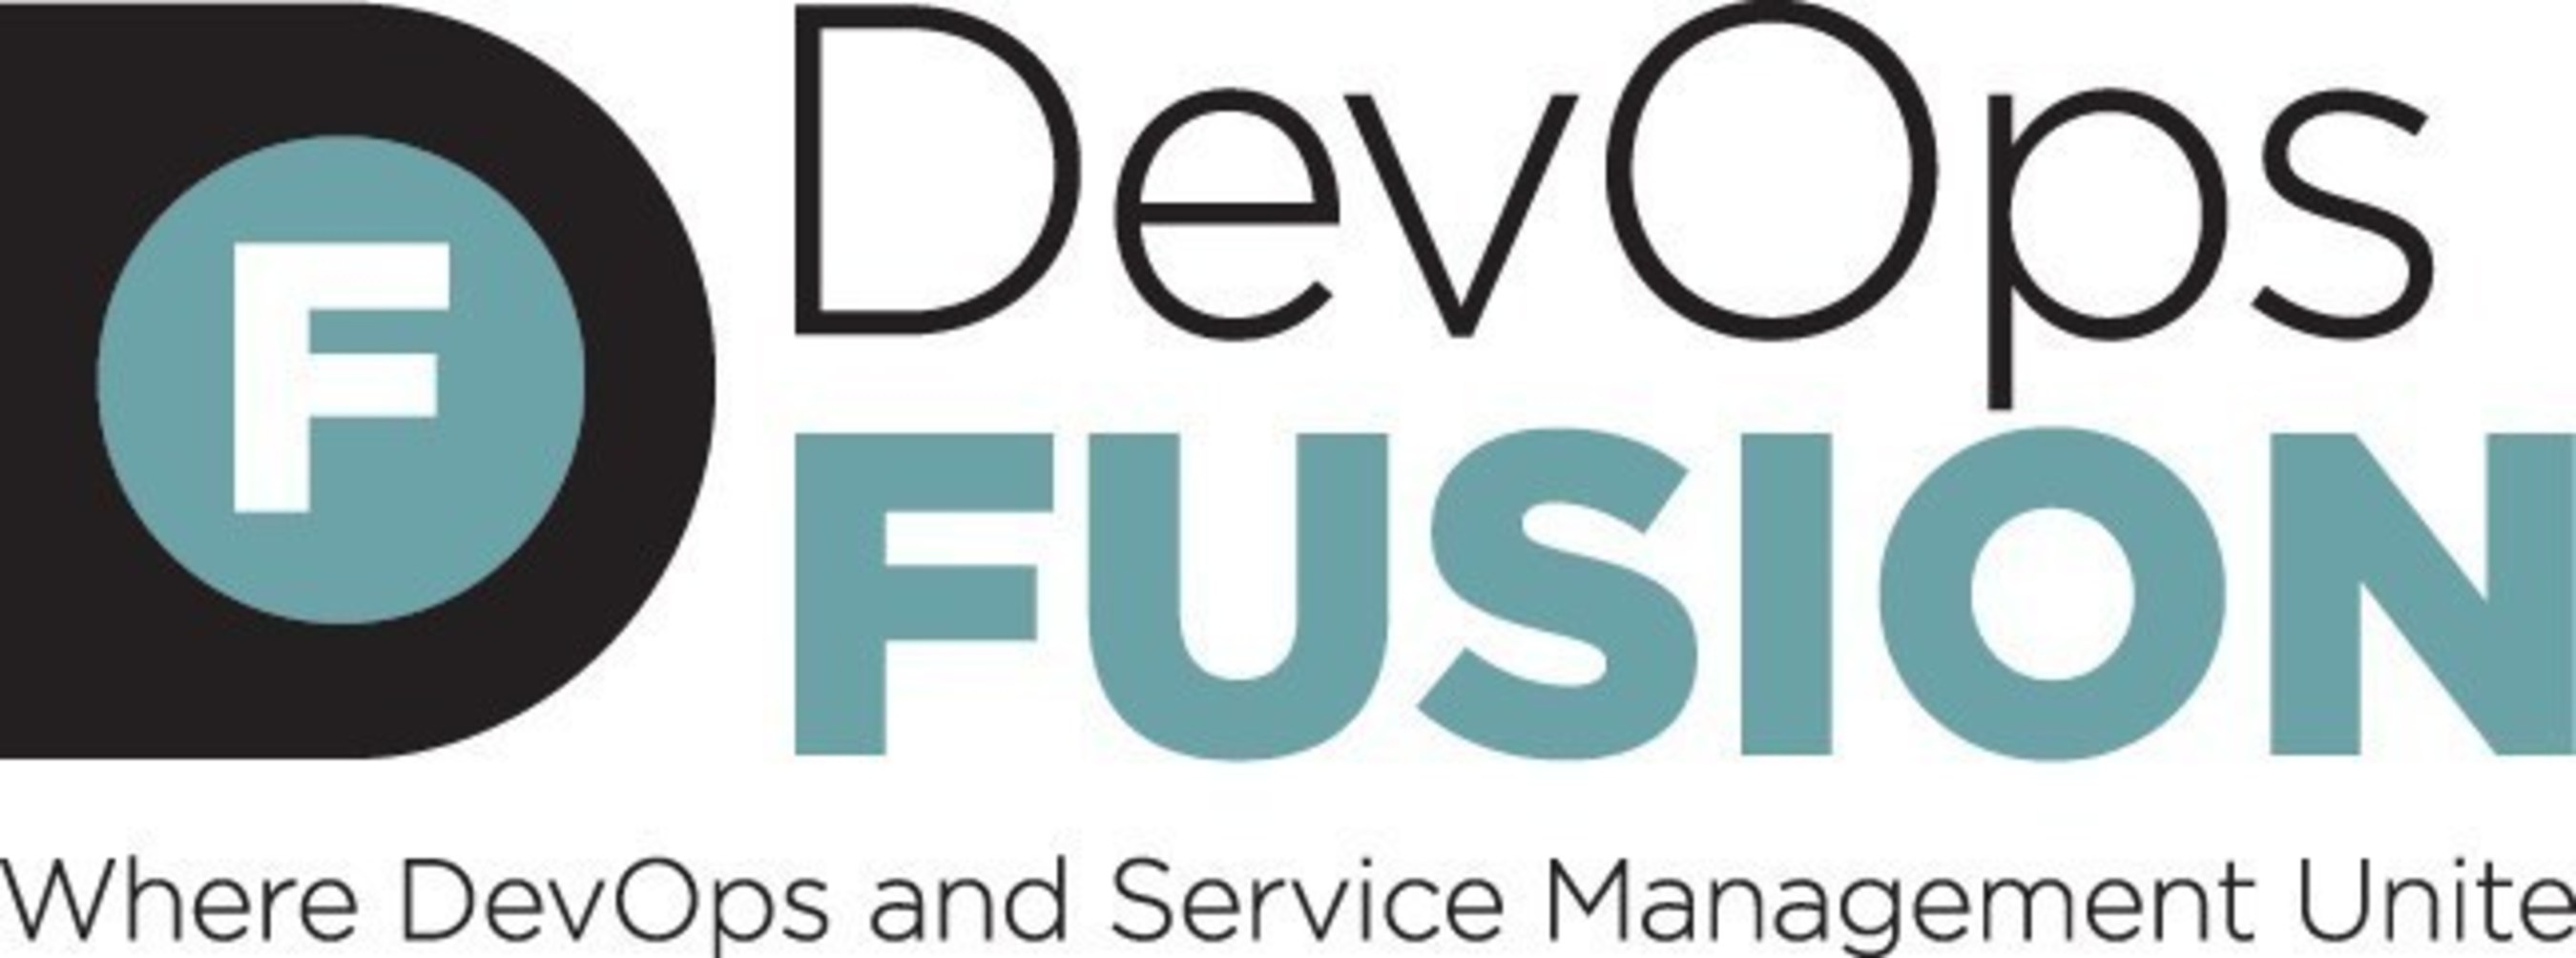 Co-located with FUSION 15 at the Hyatt Regency in New Orleans, the DevOps FUSION Summit will take place November 1-2, 2015.